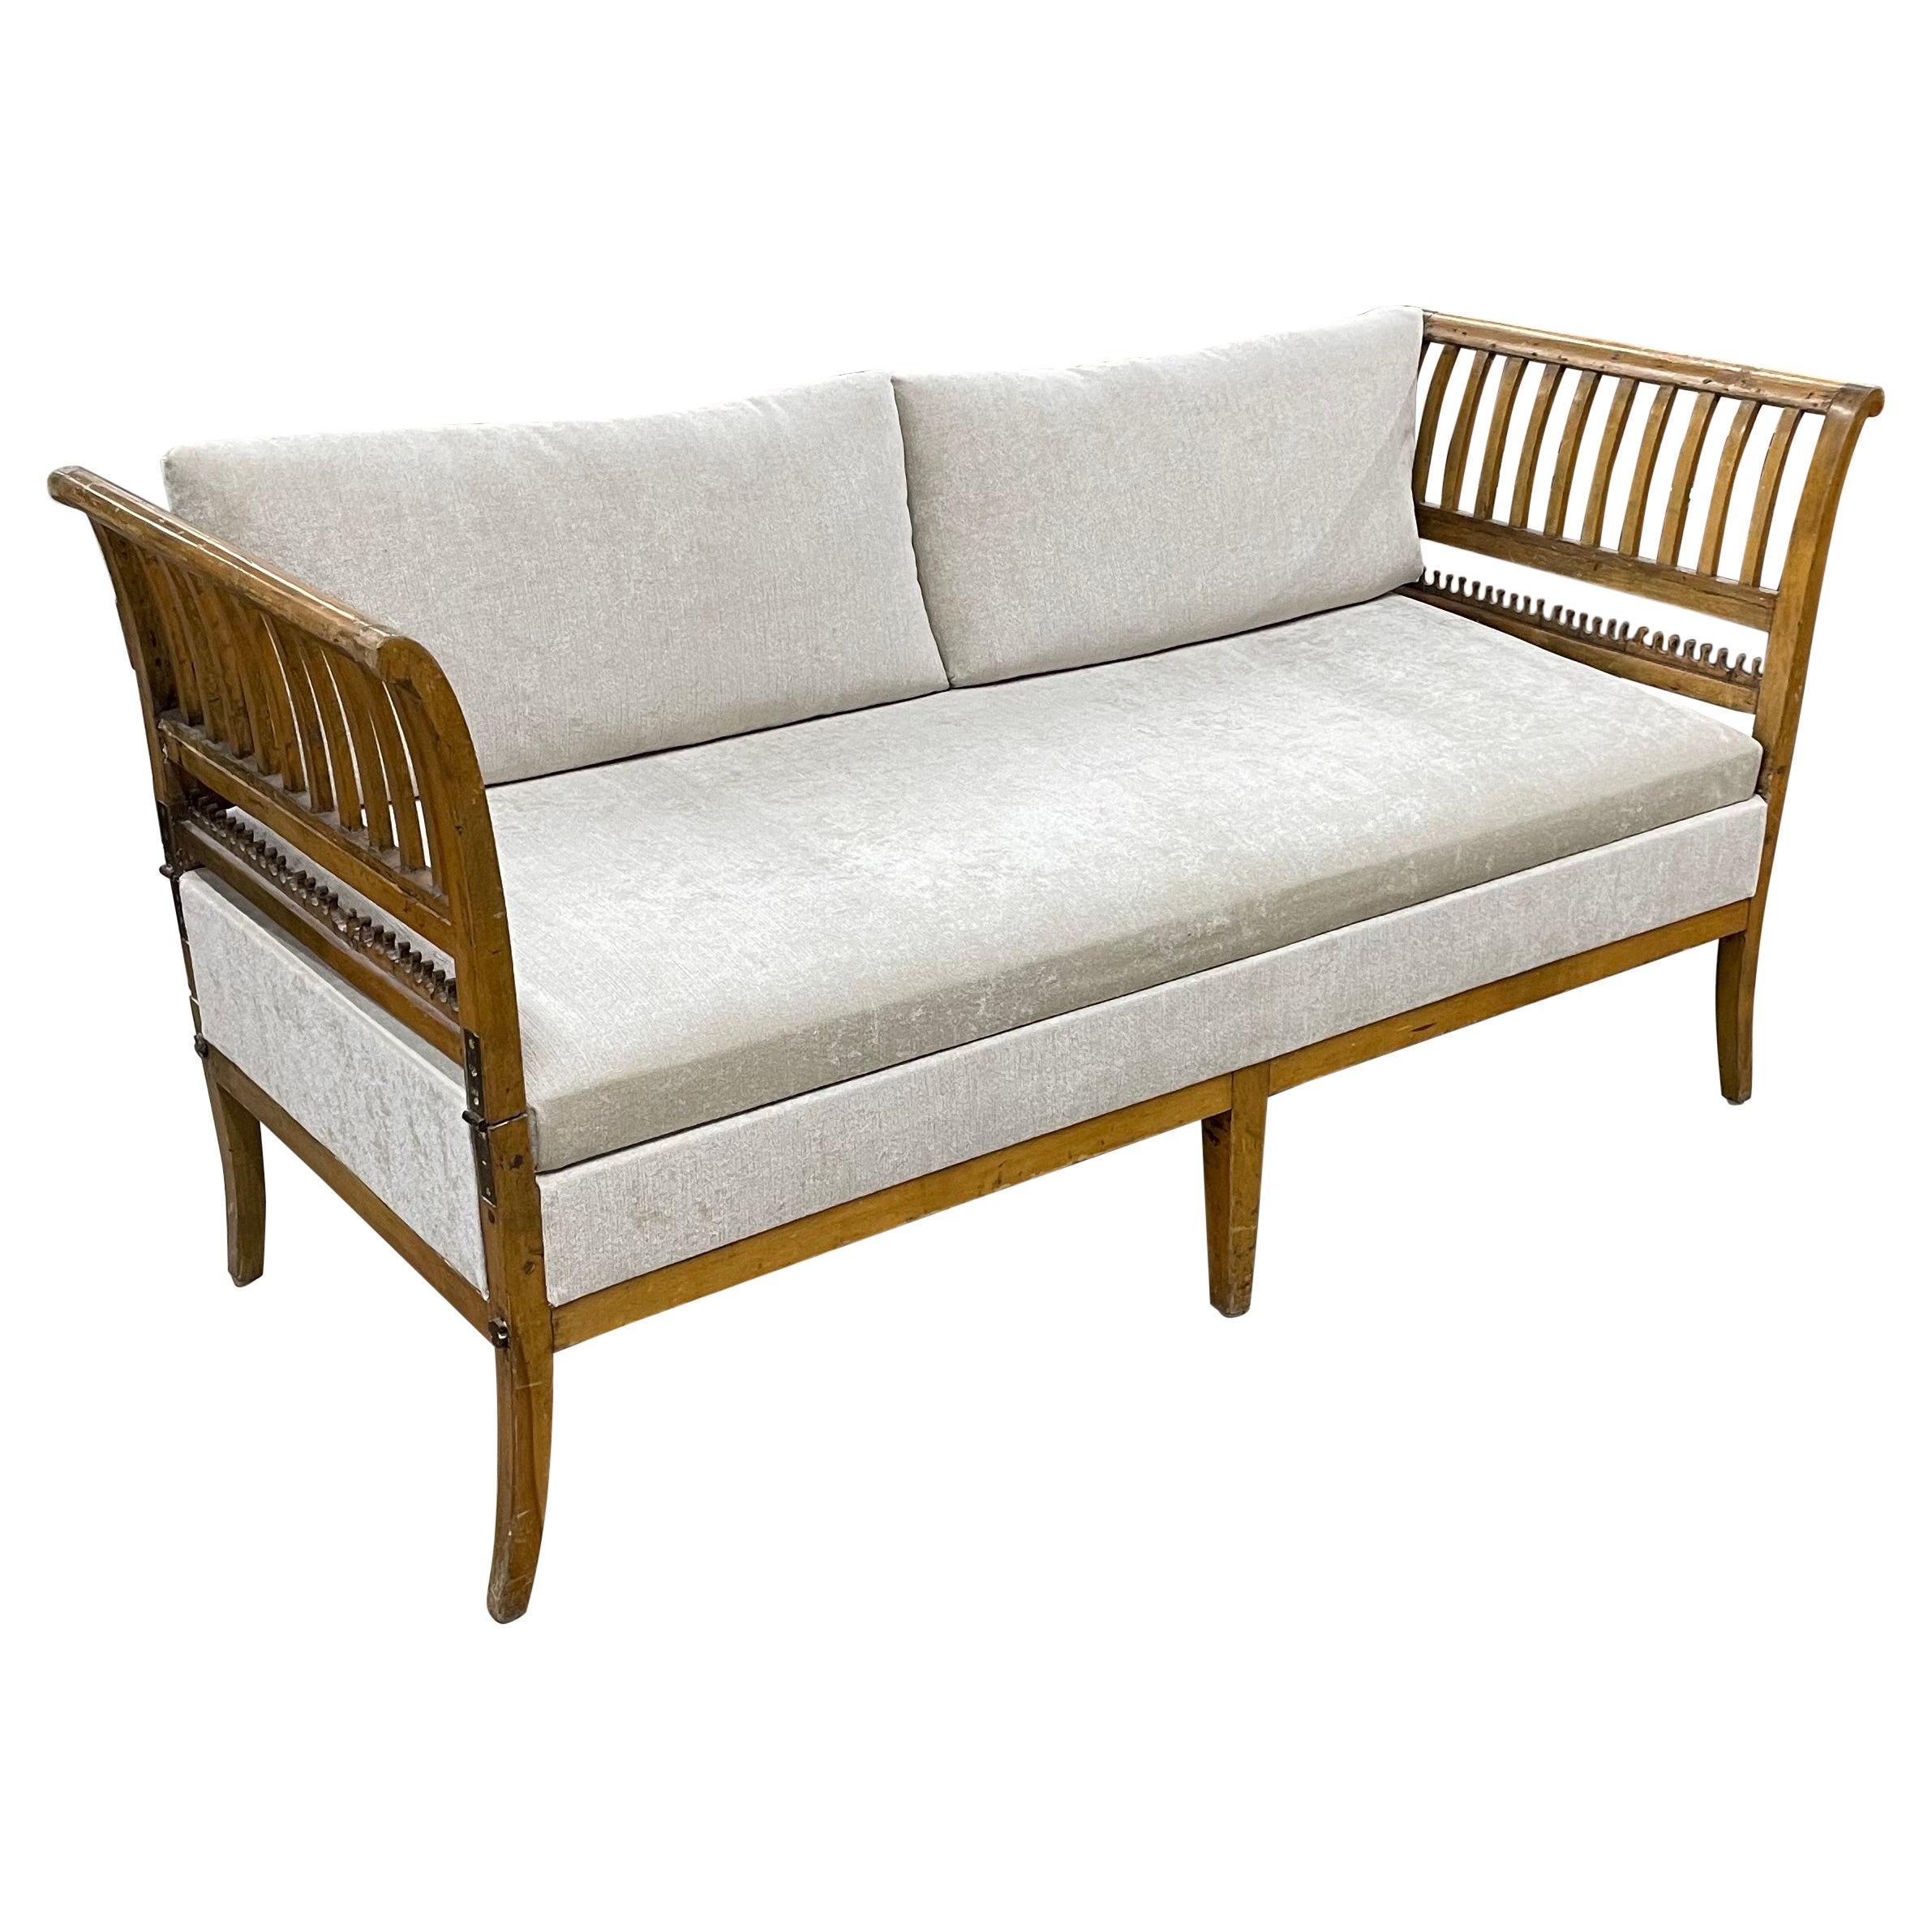 Mid 19th Century  Karl Johan Swedish Daybed For Sale